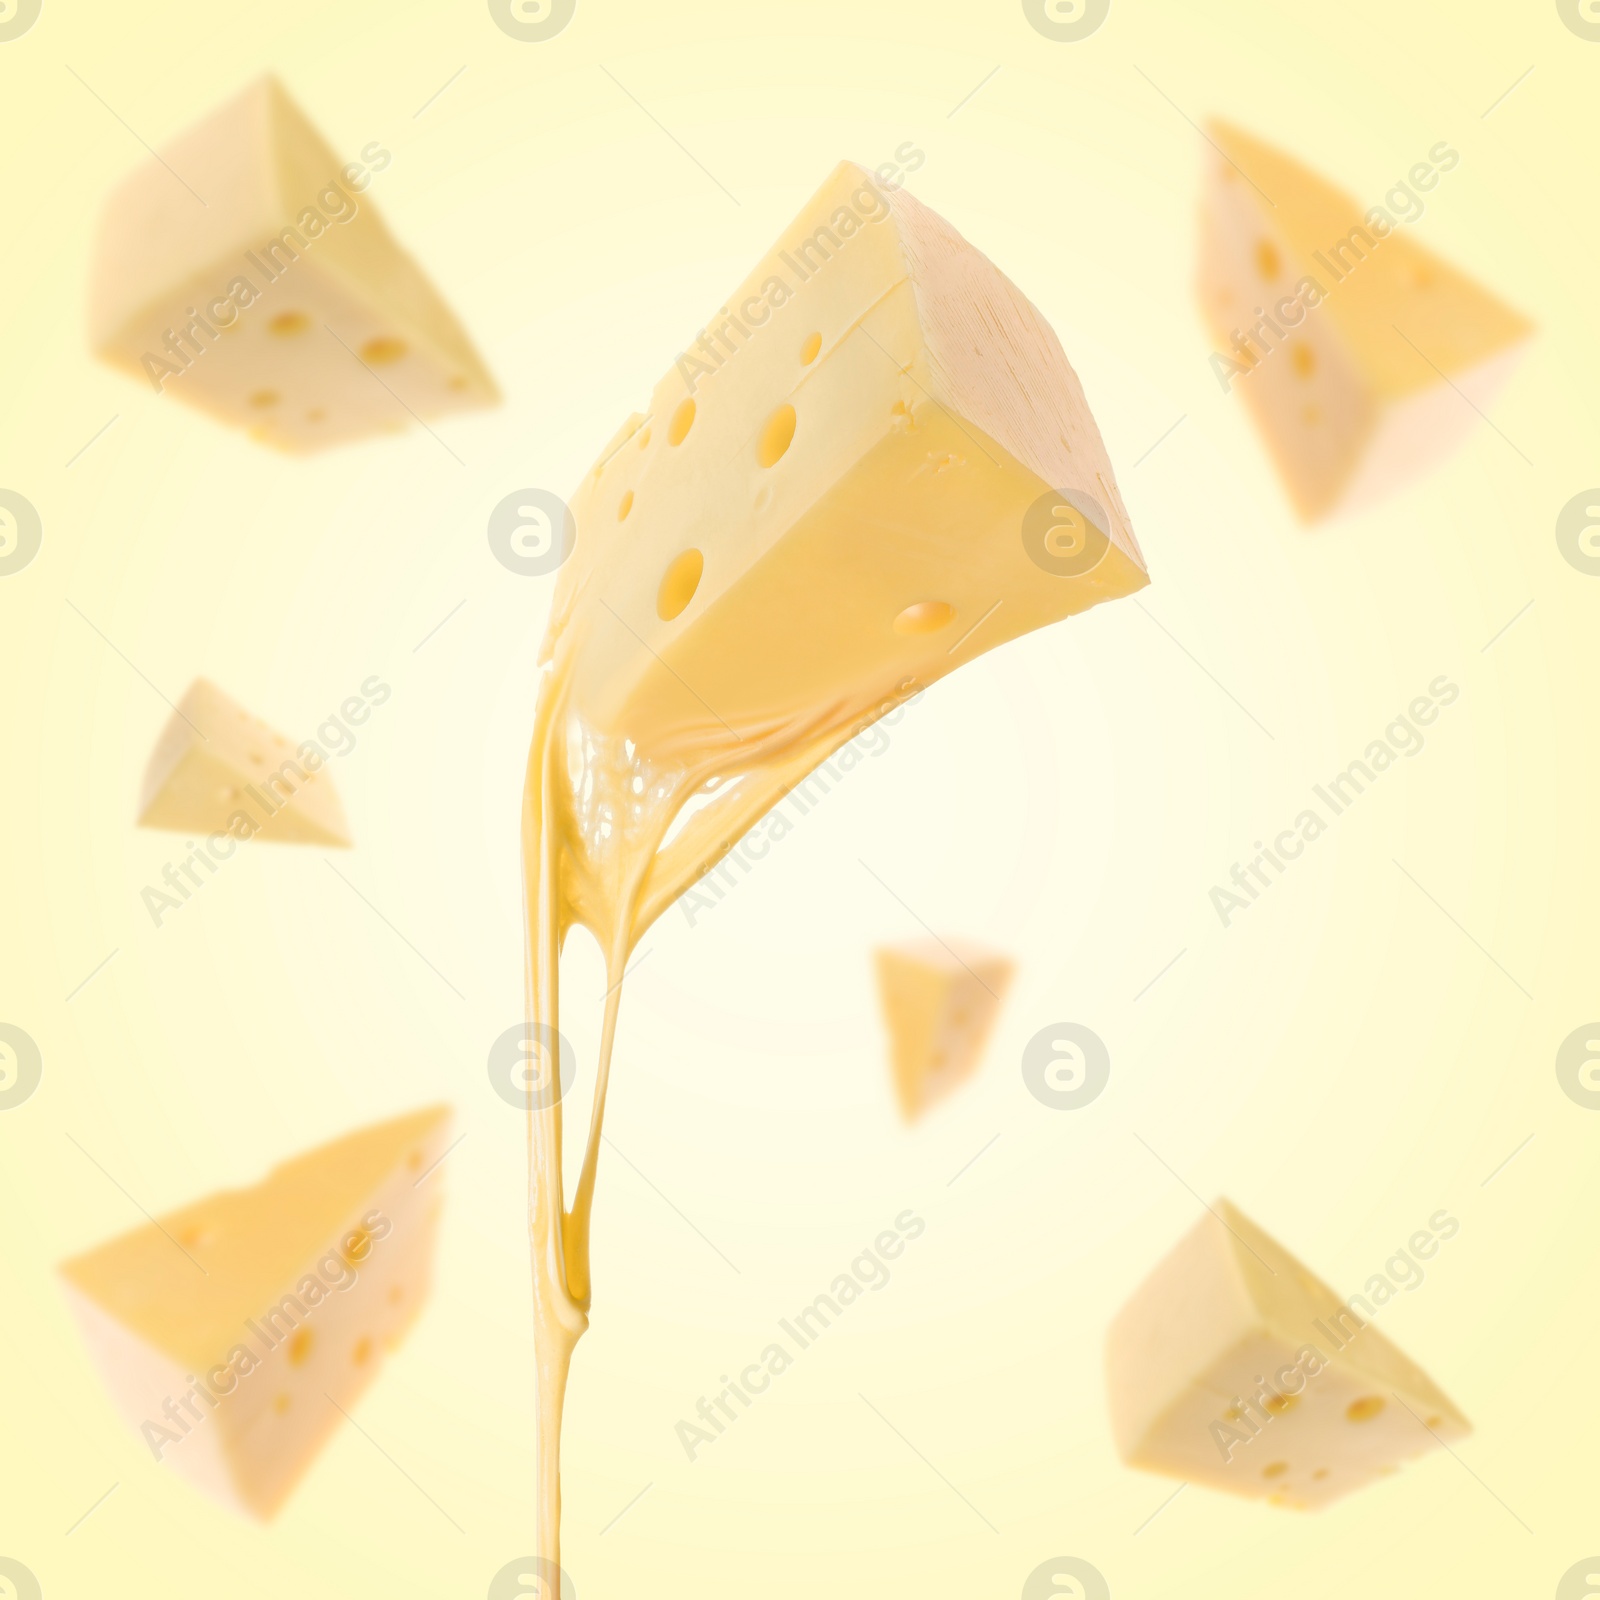 Image of Piecescheese falling on yellow background